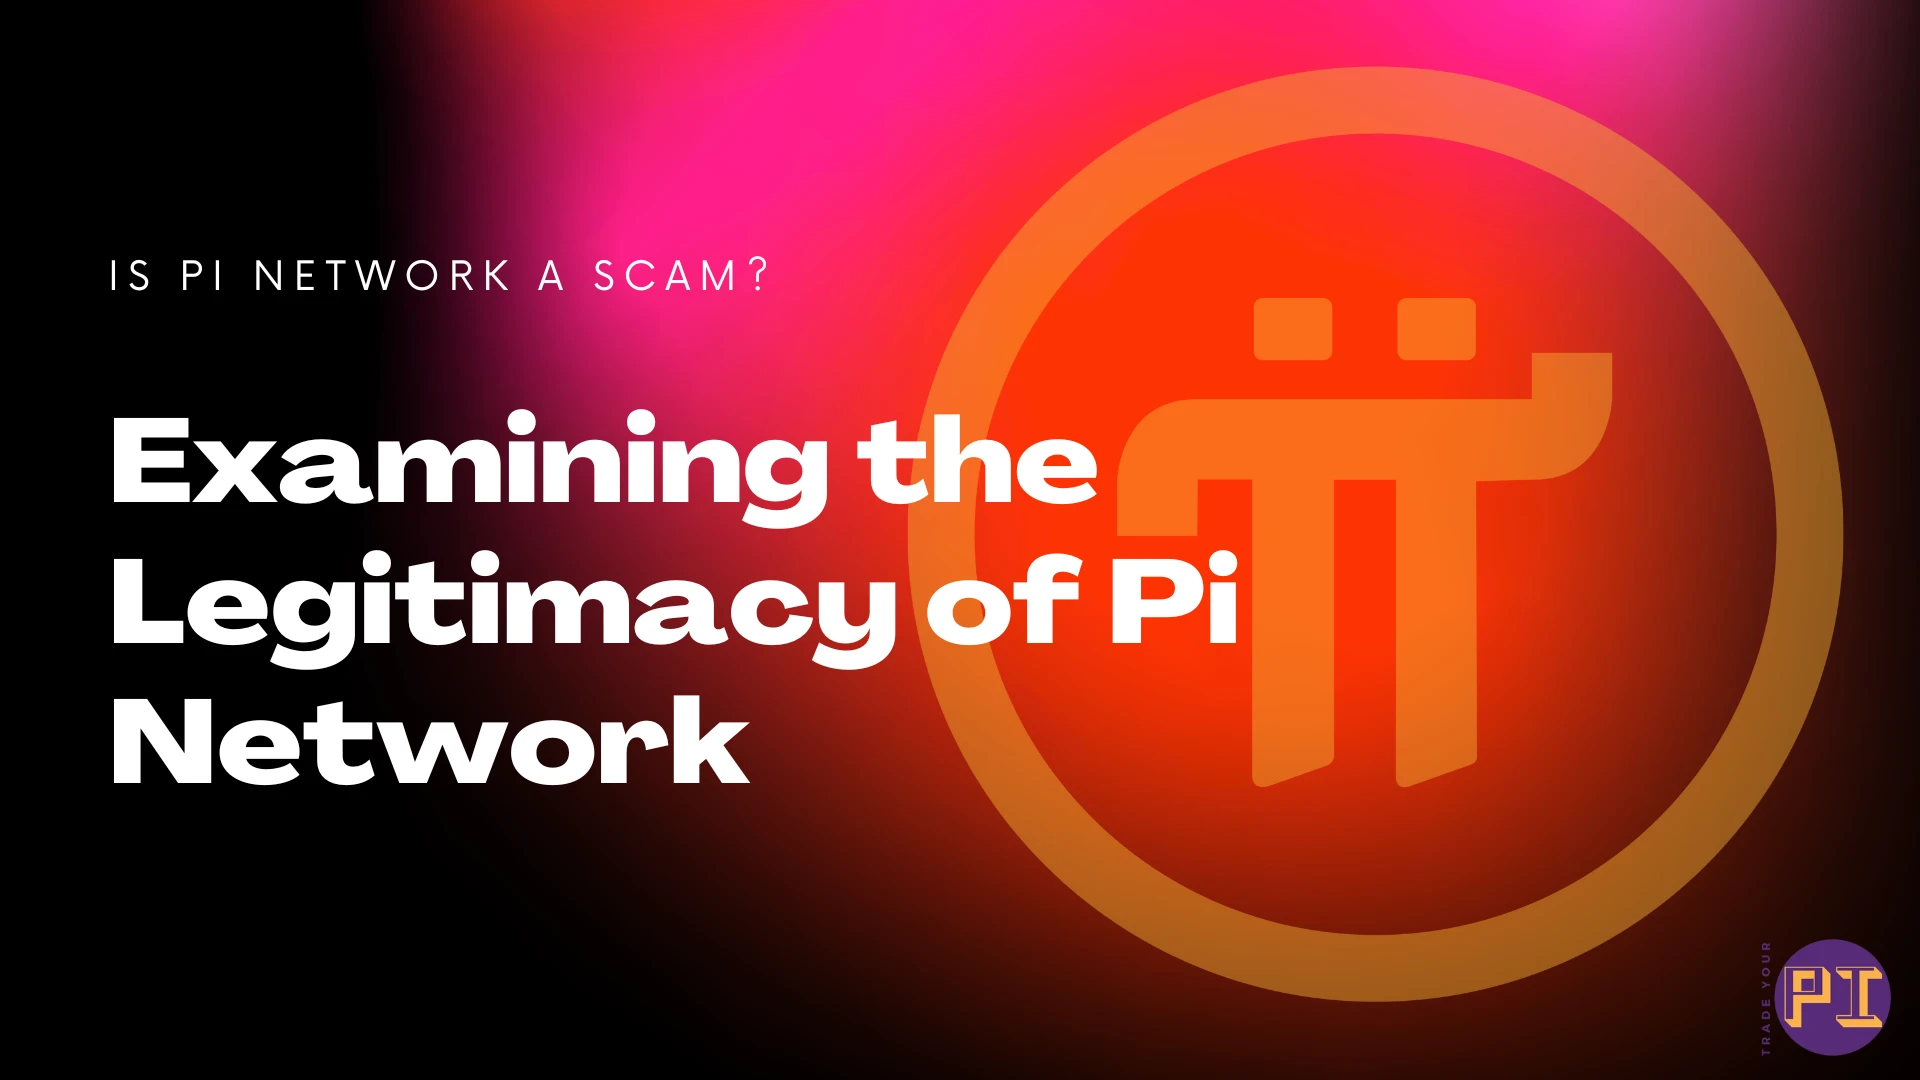 Examining the Legitimacy of Pi Network: Is it a Scam?